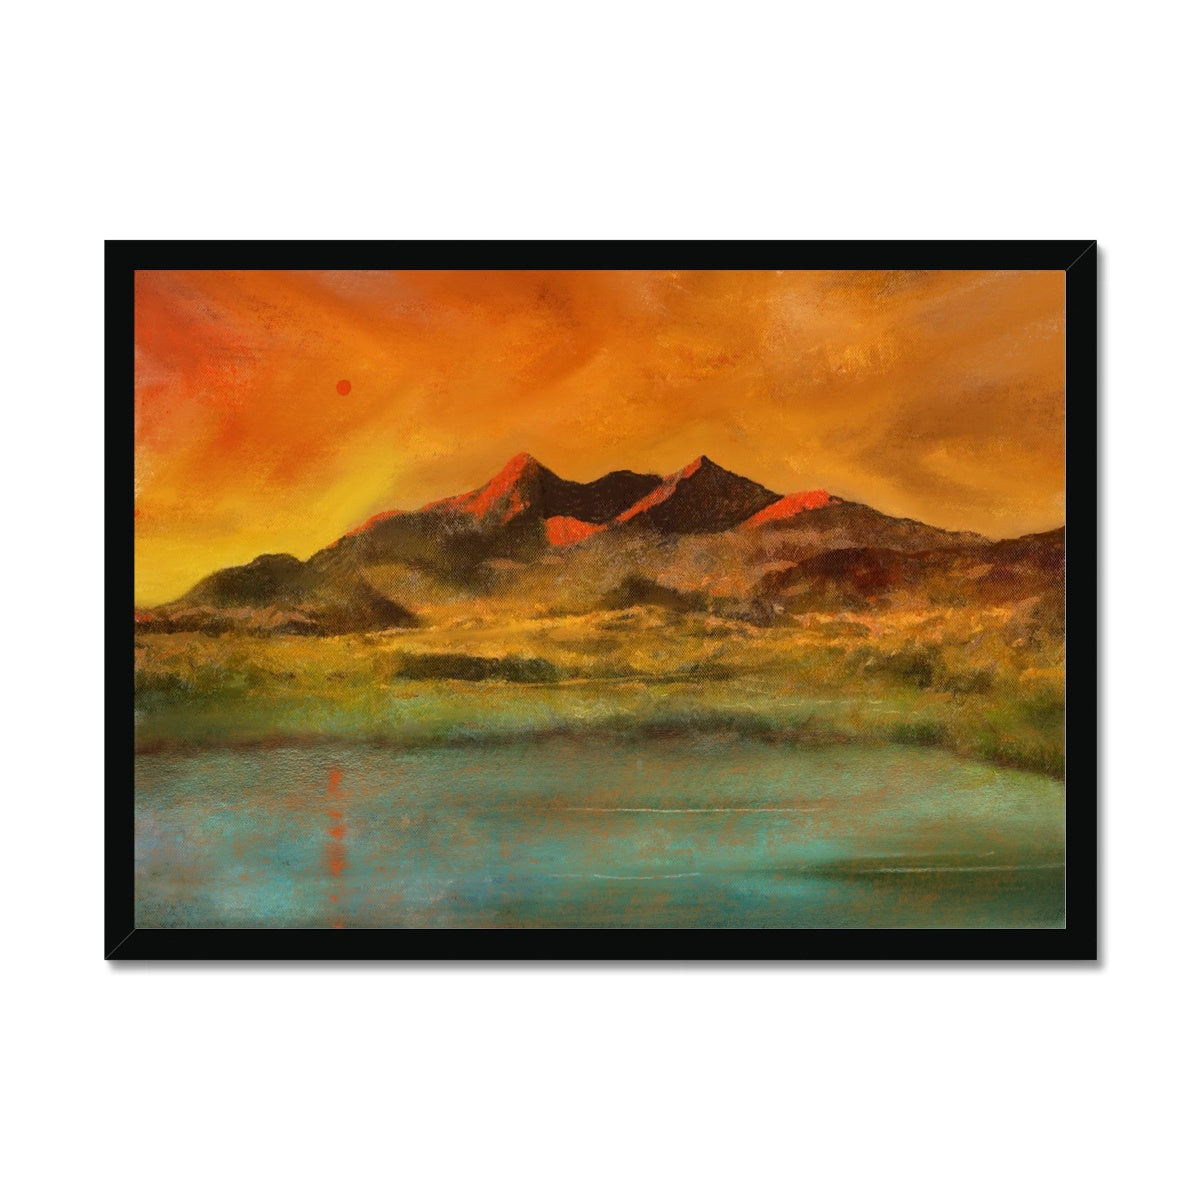 Skye Red Moon Cuillin Painting | Framed Prints From Scotland-Framed Prints-Skye Art Gallery-A2 Landscape-Black Frame-Paintings, Prints, Homeware, Art Gifts From Scotland By Scottish Artist Kevin Hunter